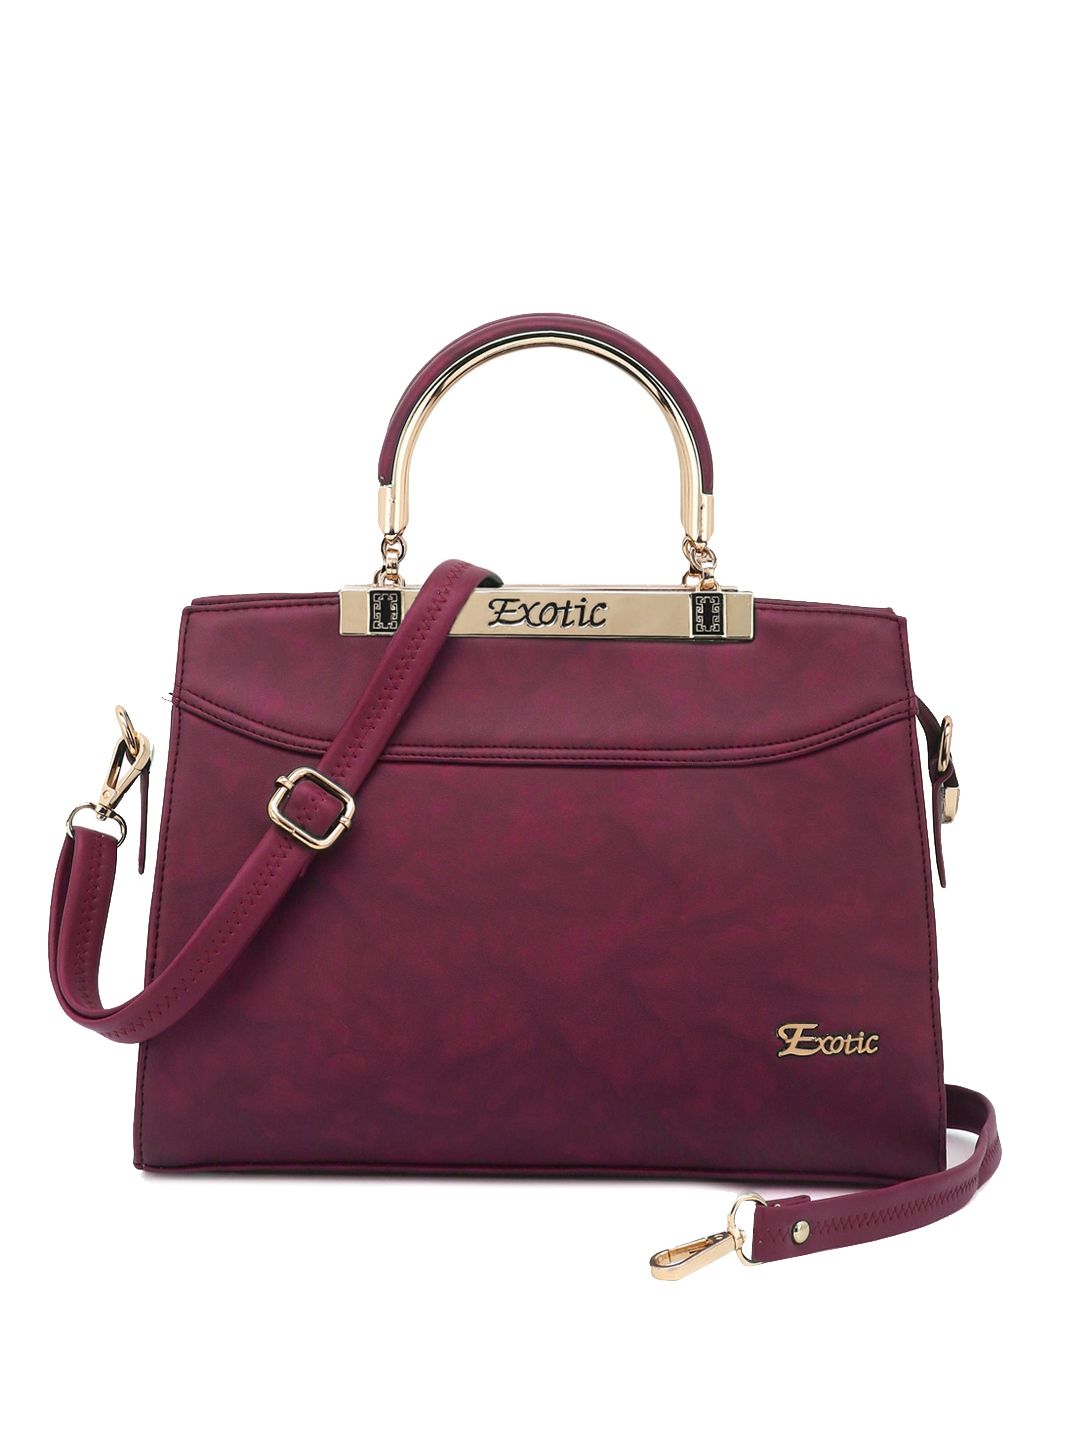 Exotic Purple Structured Handheld Bag With Detachable Sling Strap Price in India